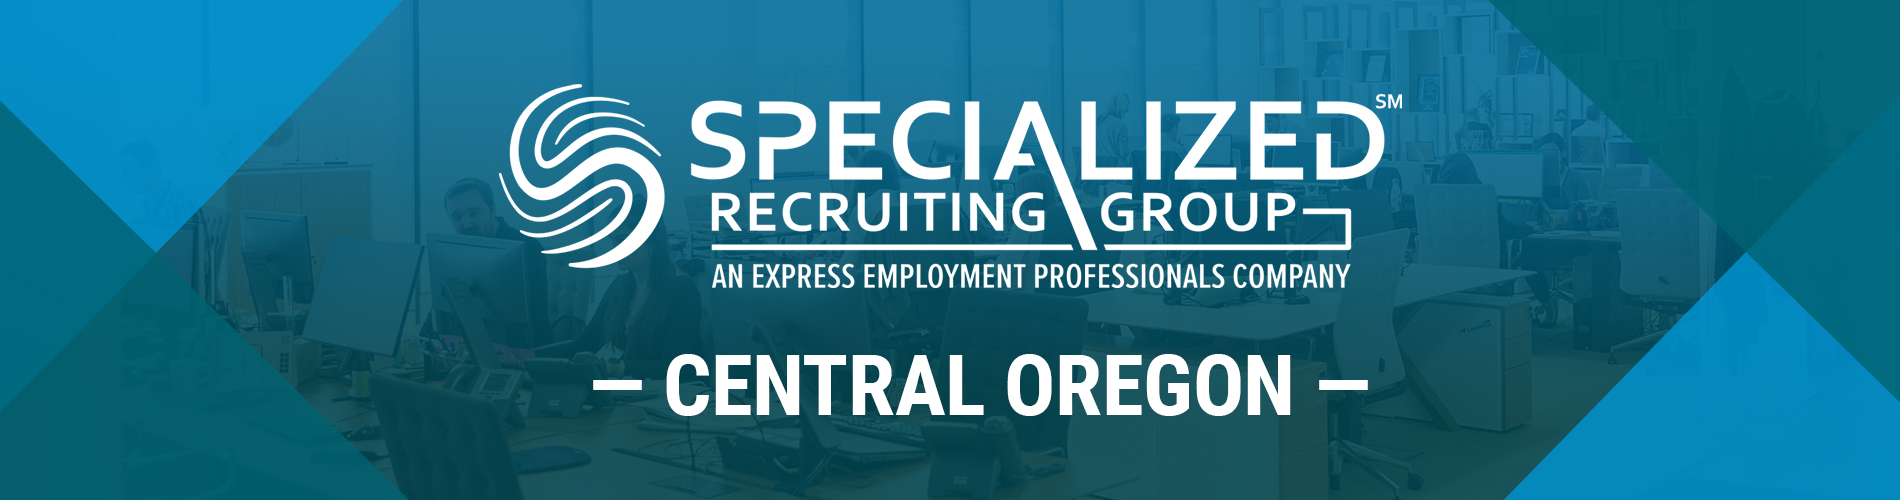 Central Oregon Specialized Recruiting Group in Bend